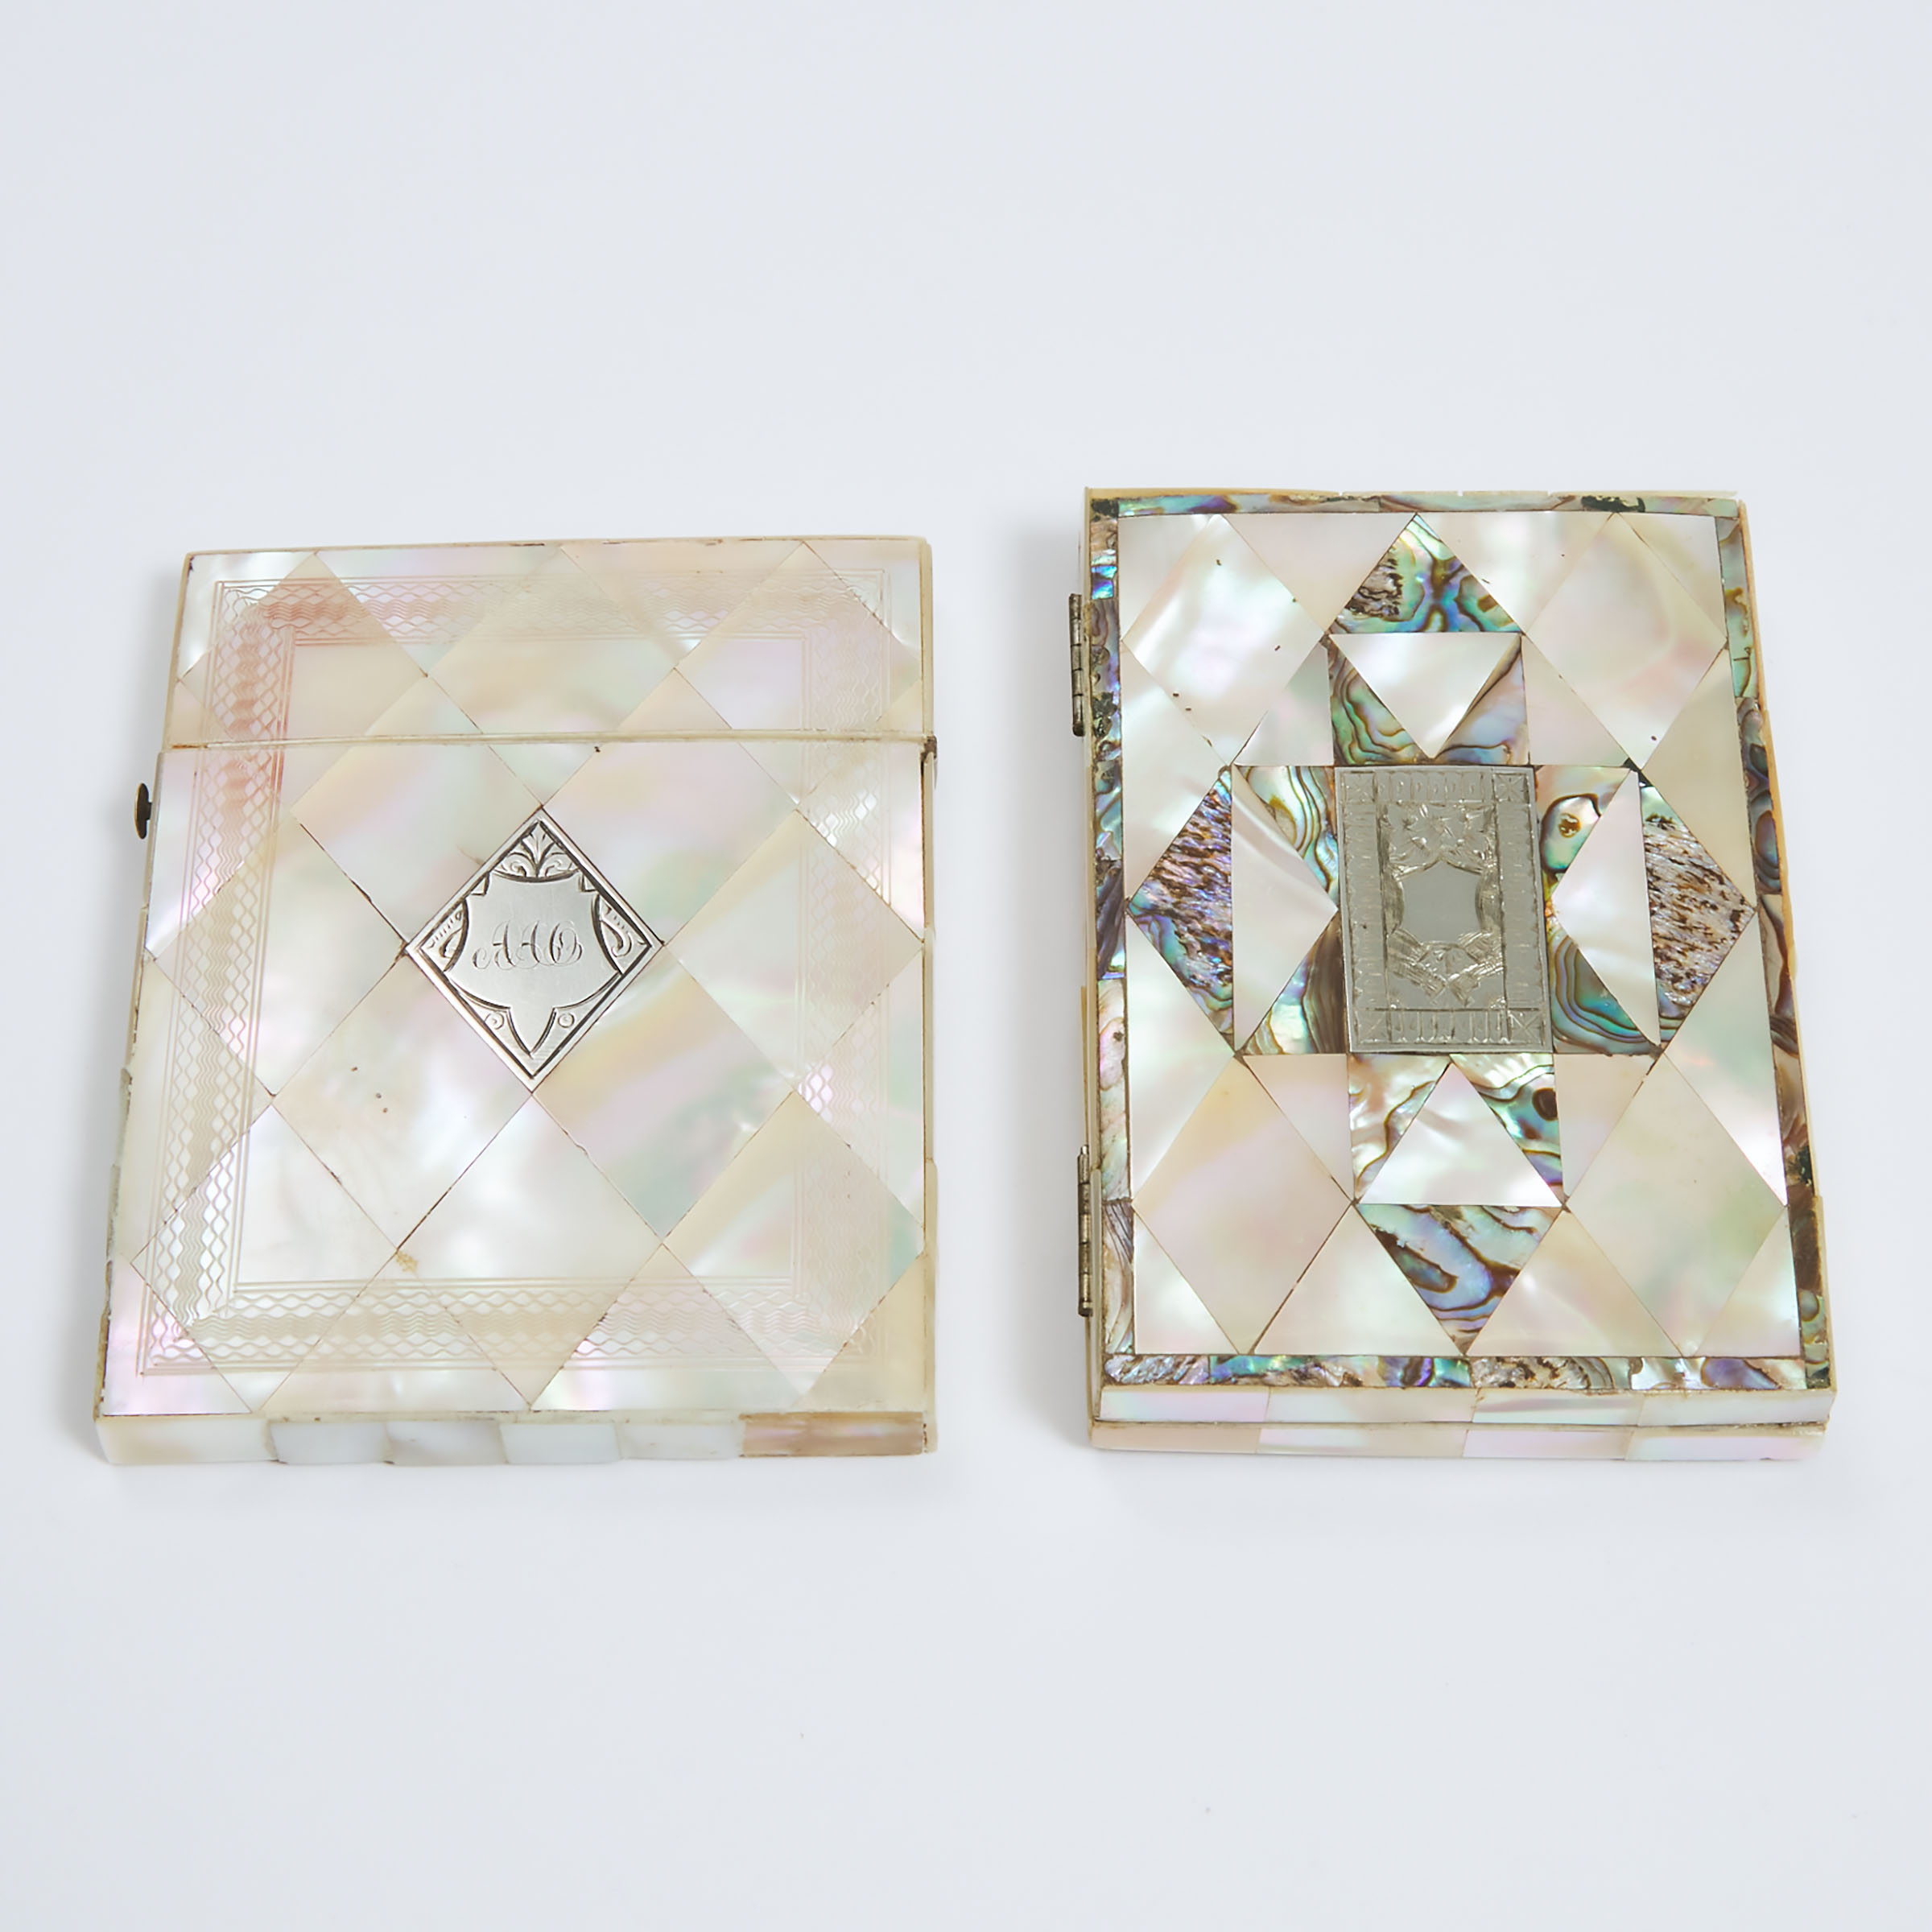 Two Victorian Silver Mounted Abalone Inlaid Card Cases, late 19th/early 20th century